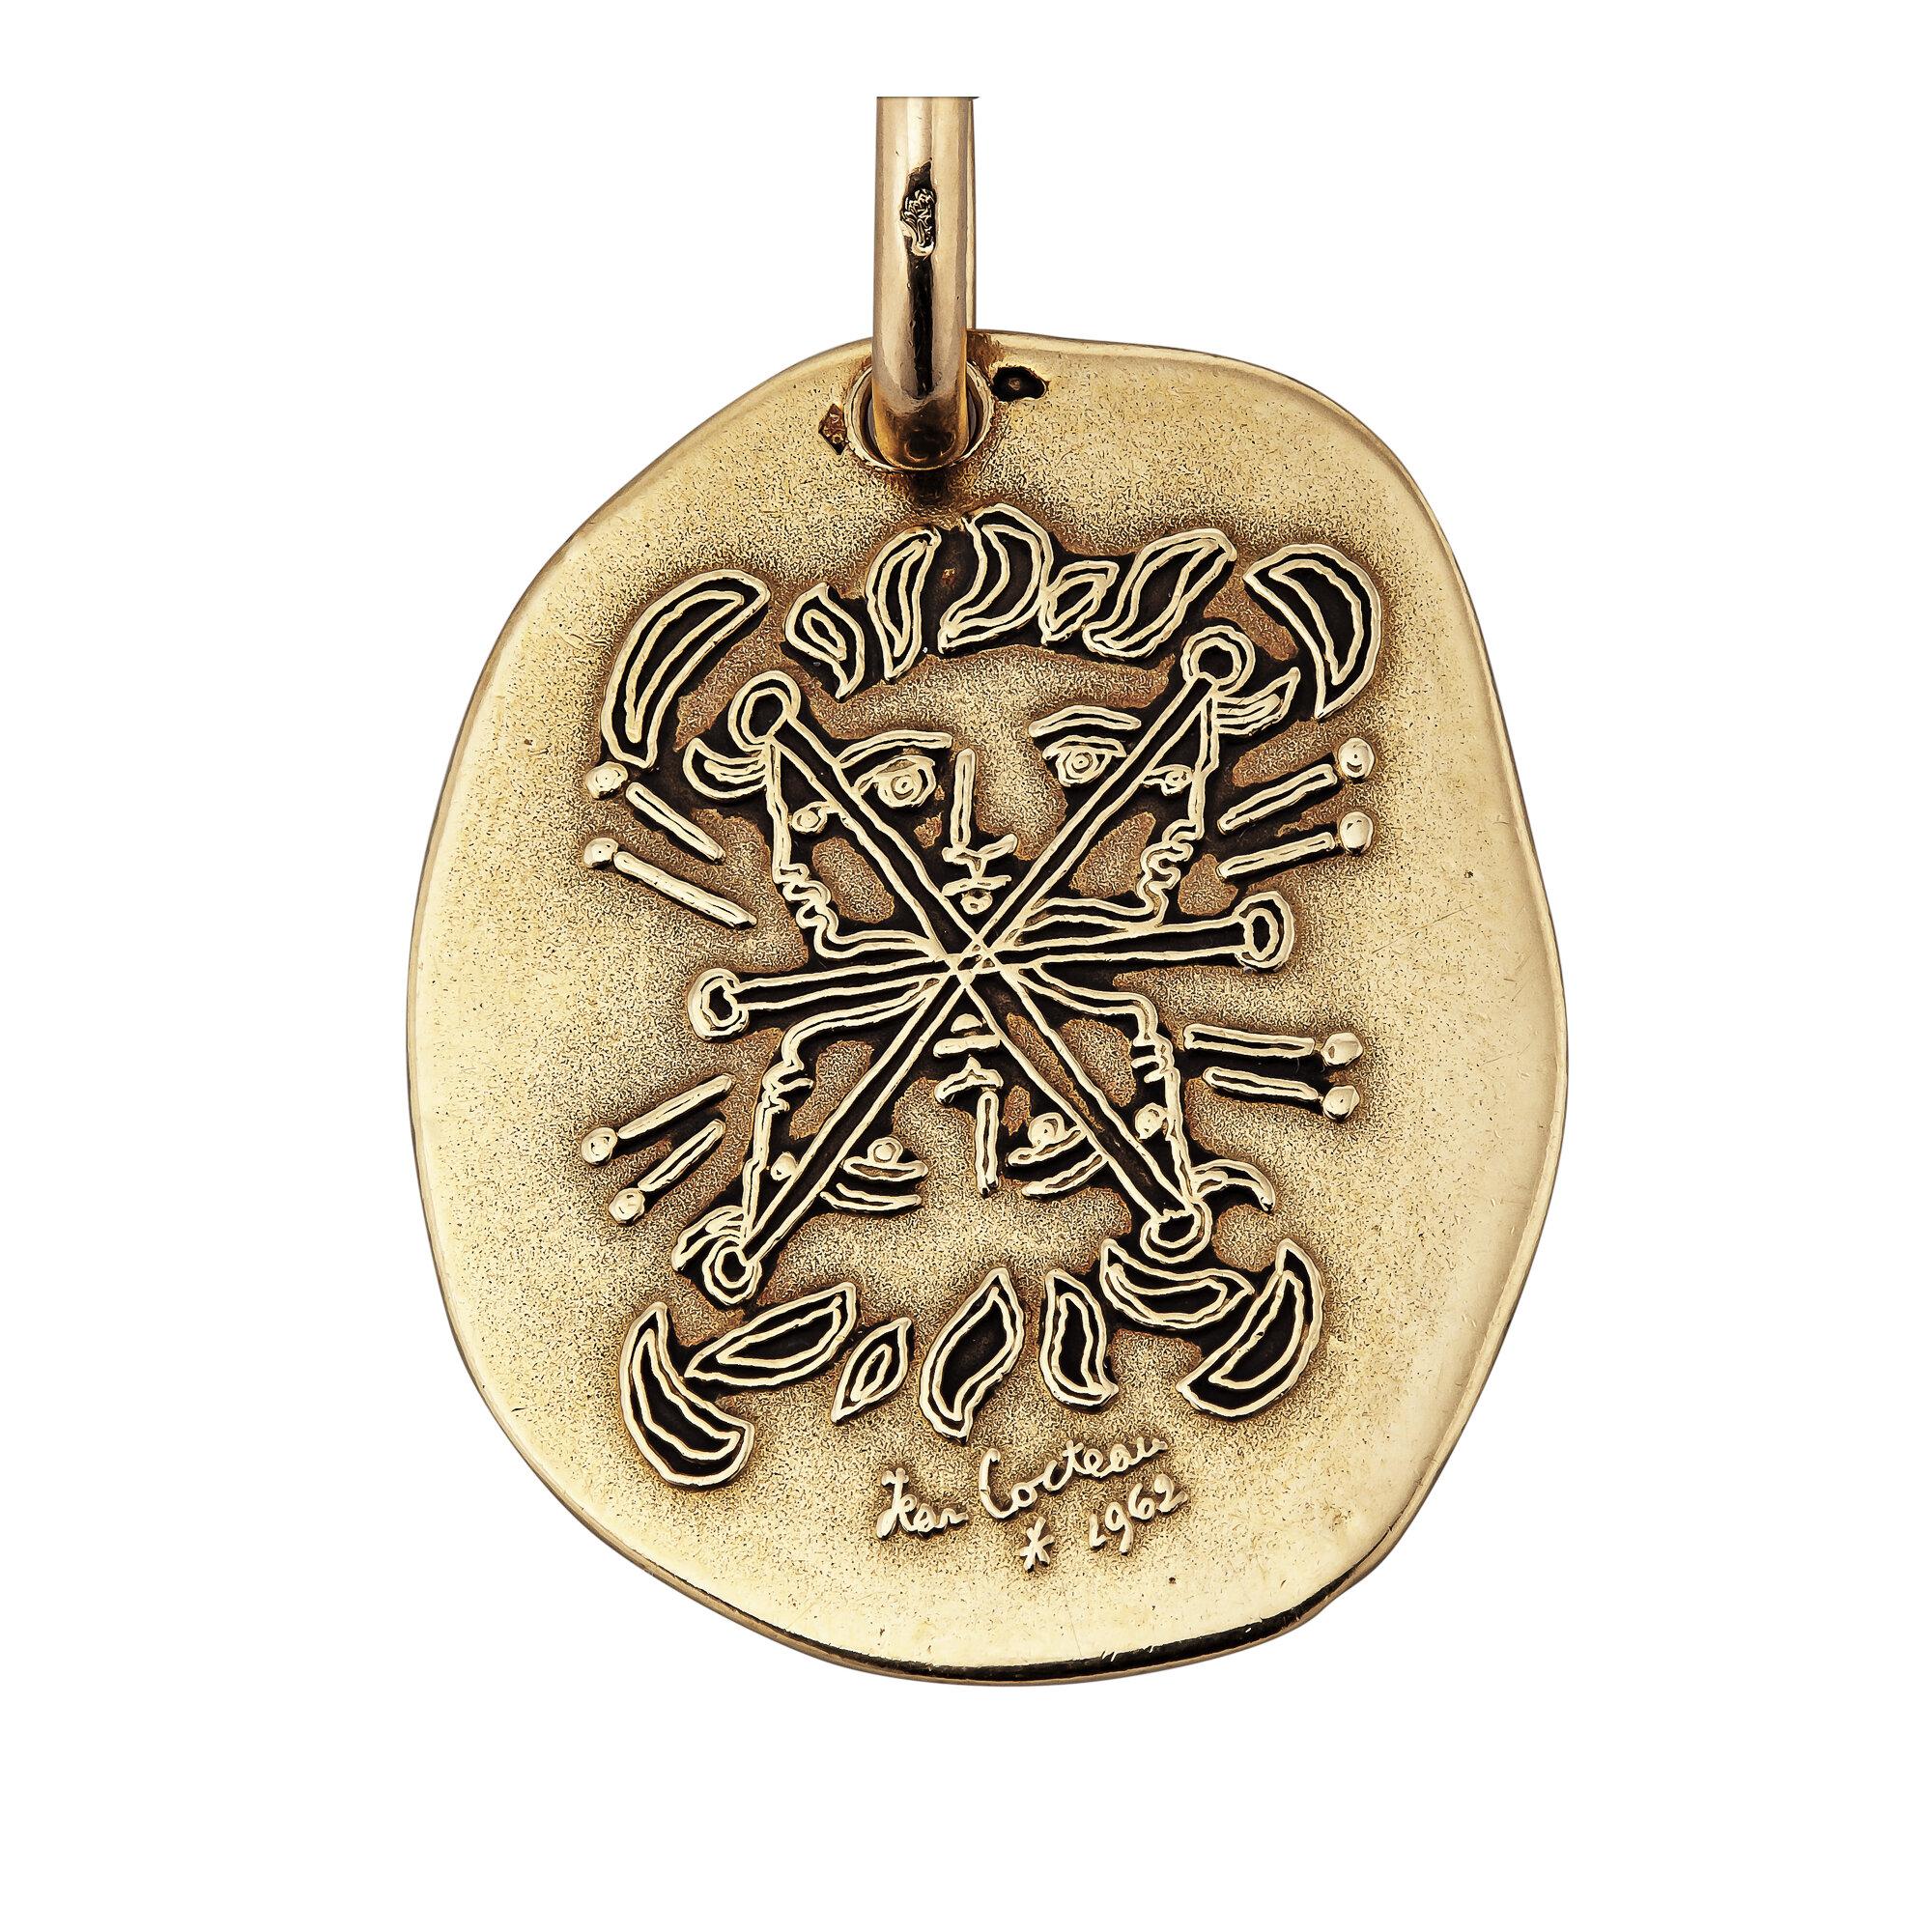 Designed by Jean Cocteau and Fred Paris, this whimsical mid-century gold disc pendant necklace features six hidden faces within its mesmerizing frontal sketch.  Jean Cocteau, known as a brilliant French playwright, poet, film maker, designer, and